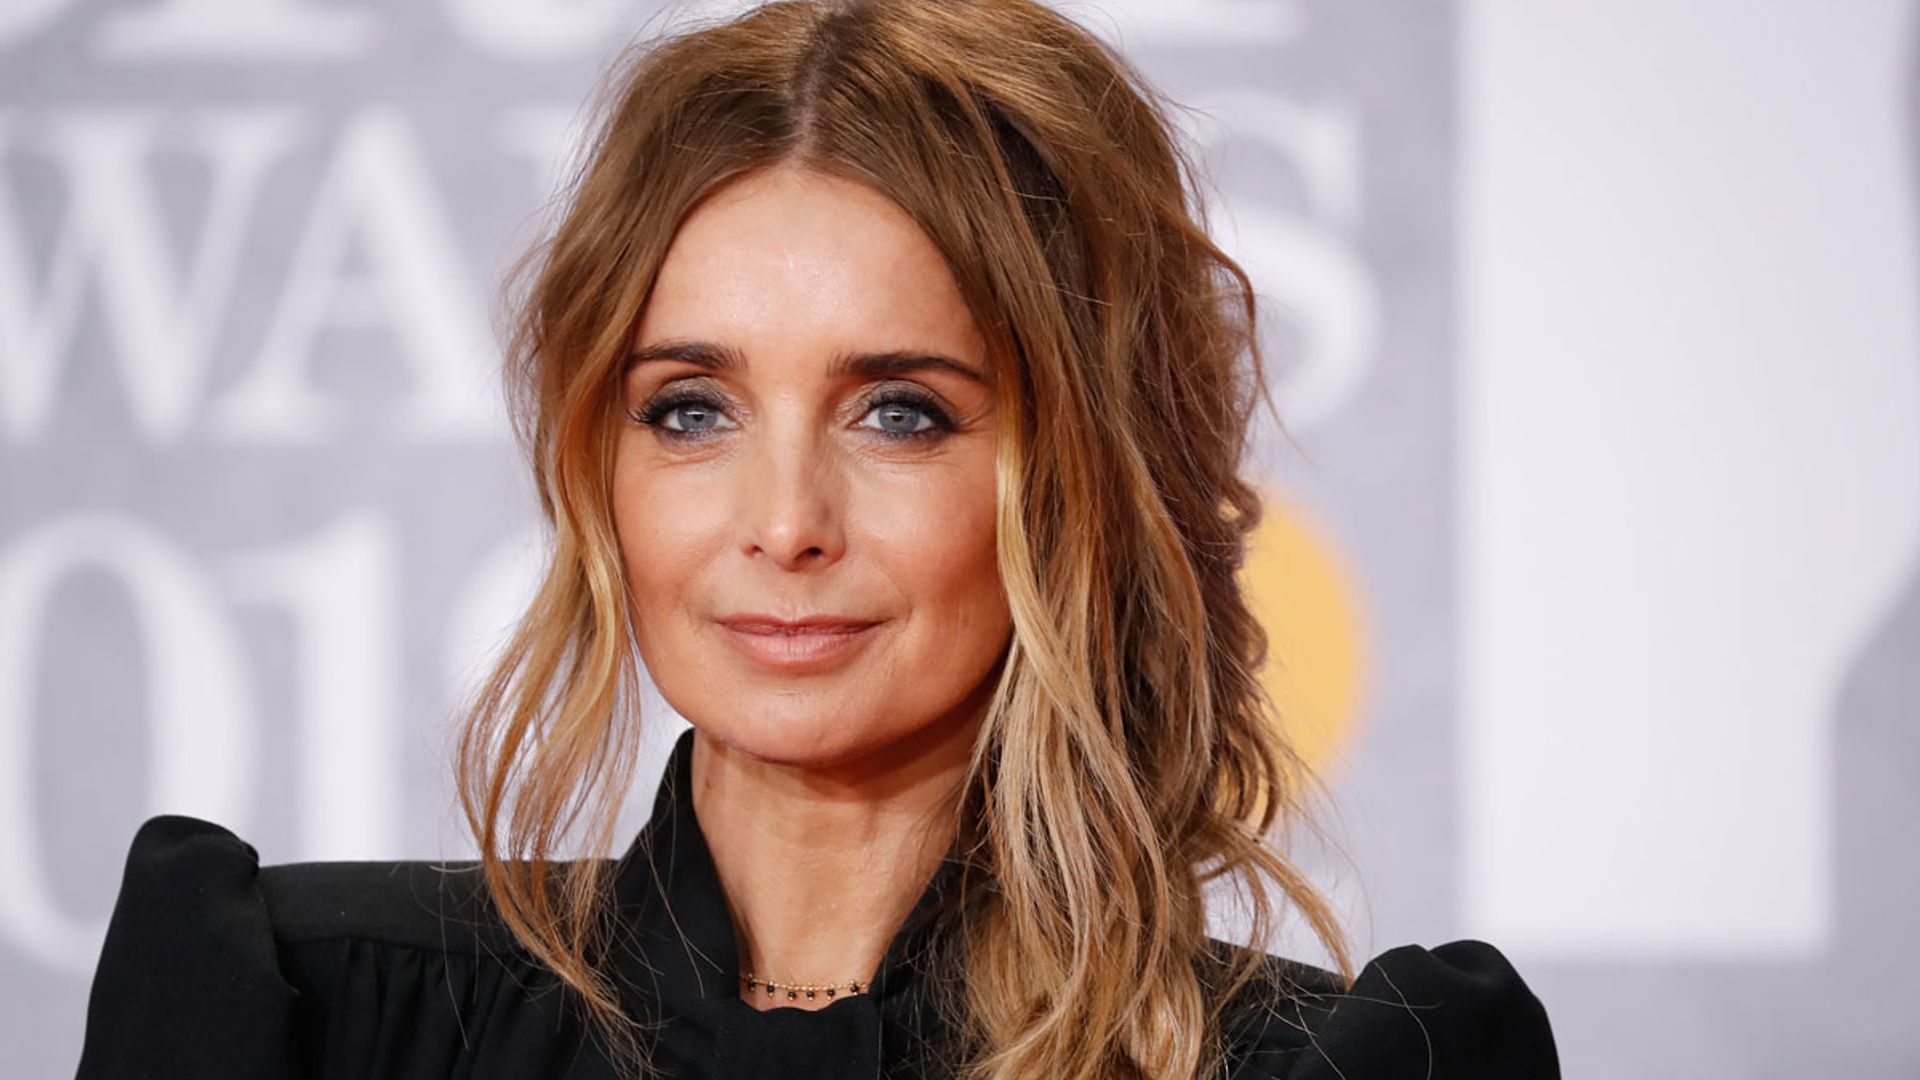 Louise Redknapp posts cryptic Instagram message about emotional turmoil